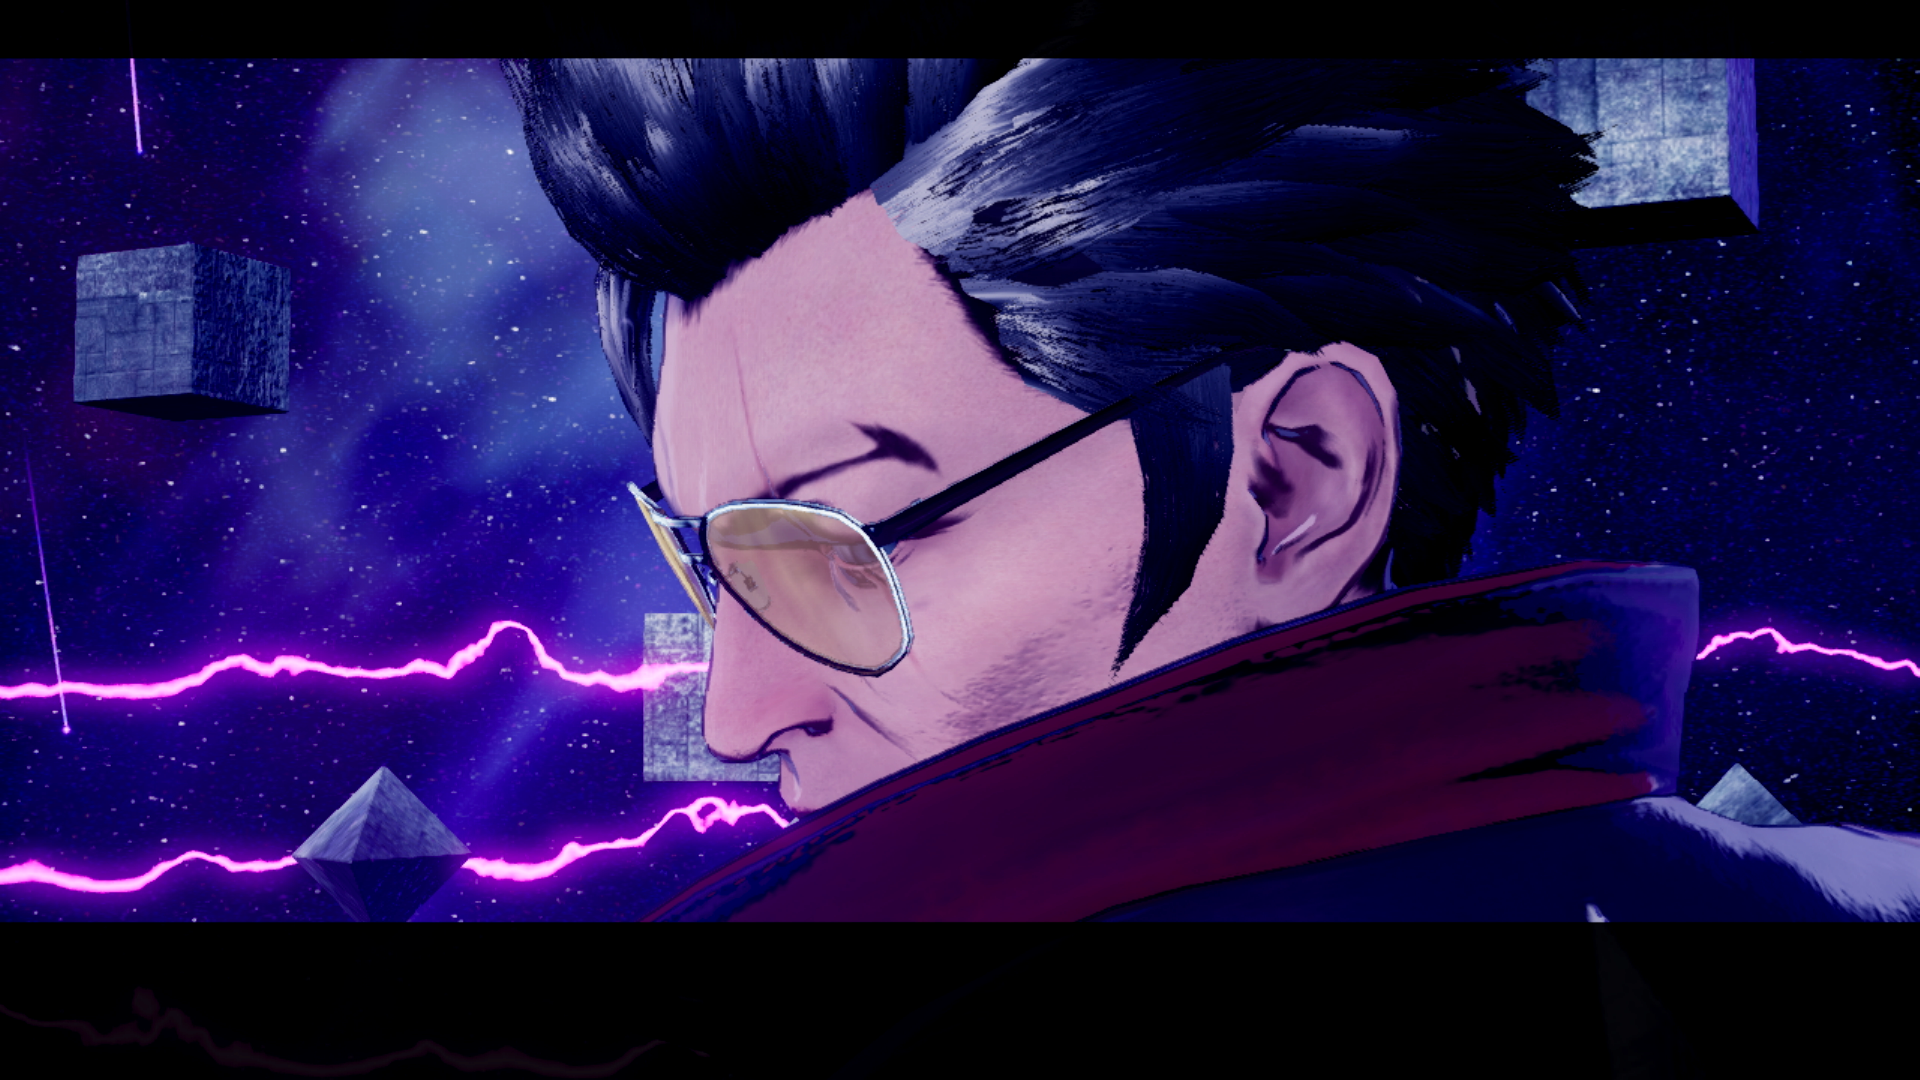 Travis Touchdown from No More Heroes 3